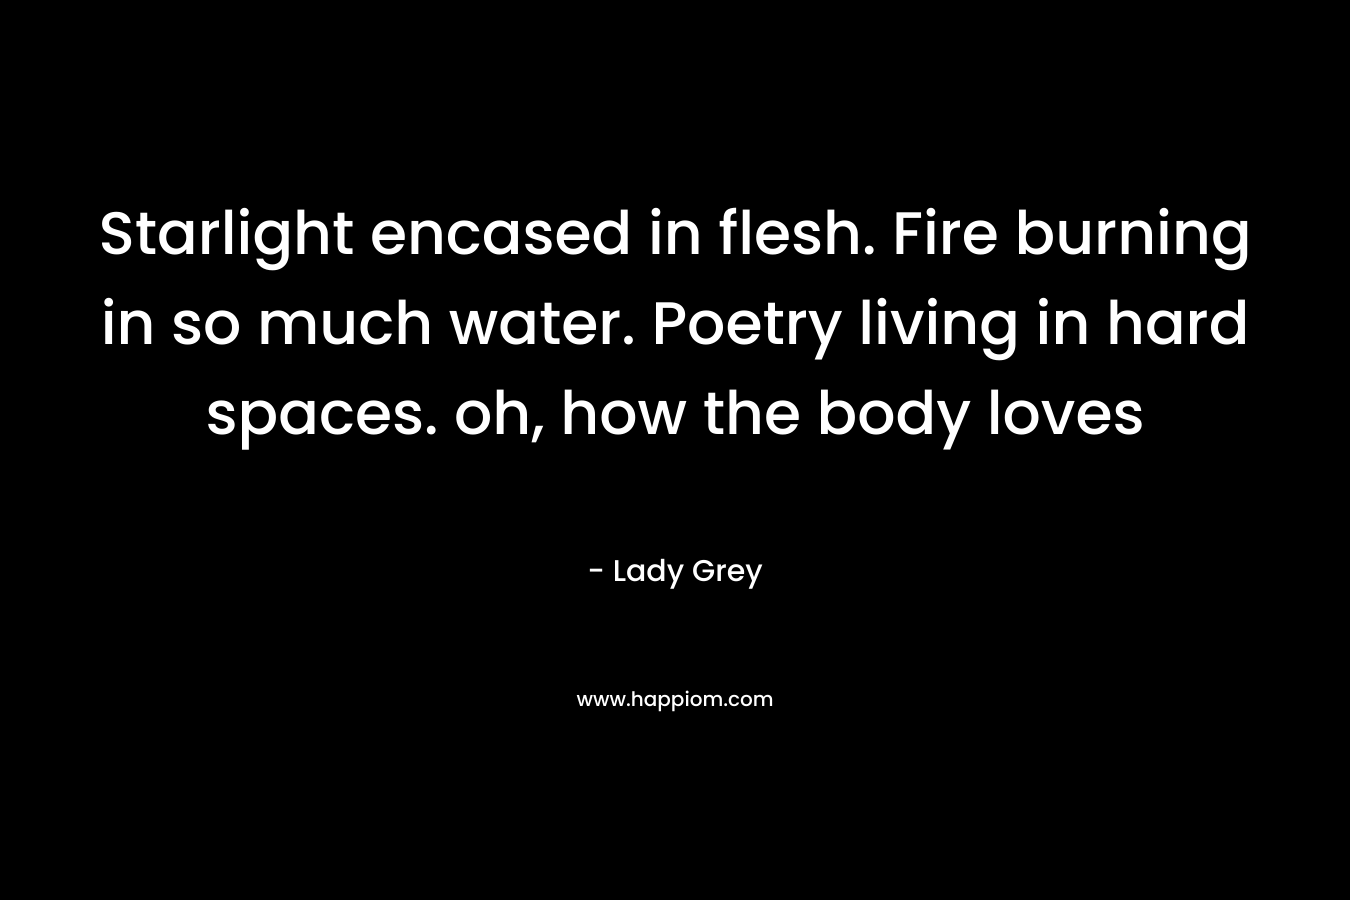 Starlight encased in flesh. Fire burning in so much water. Poetry living in hard spaces. oh, how the body loves